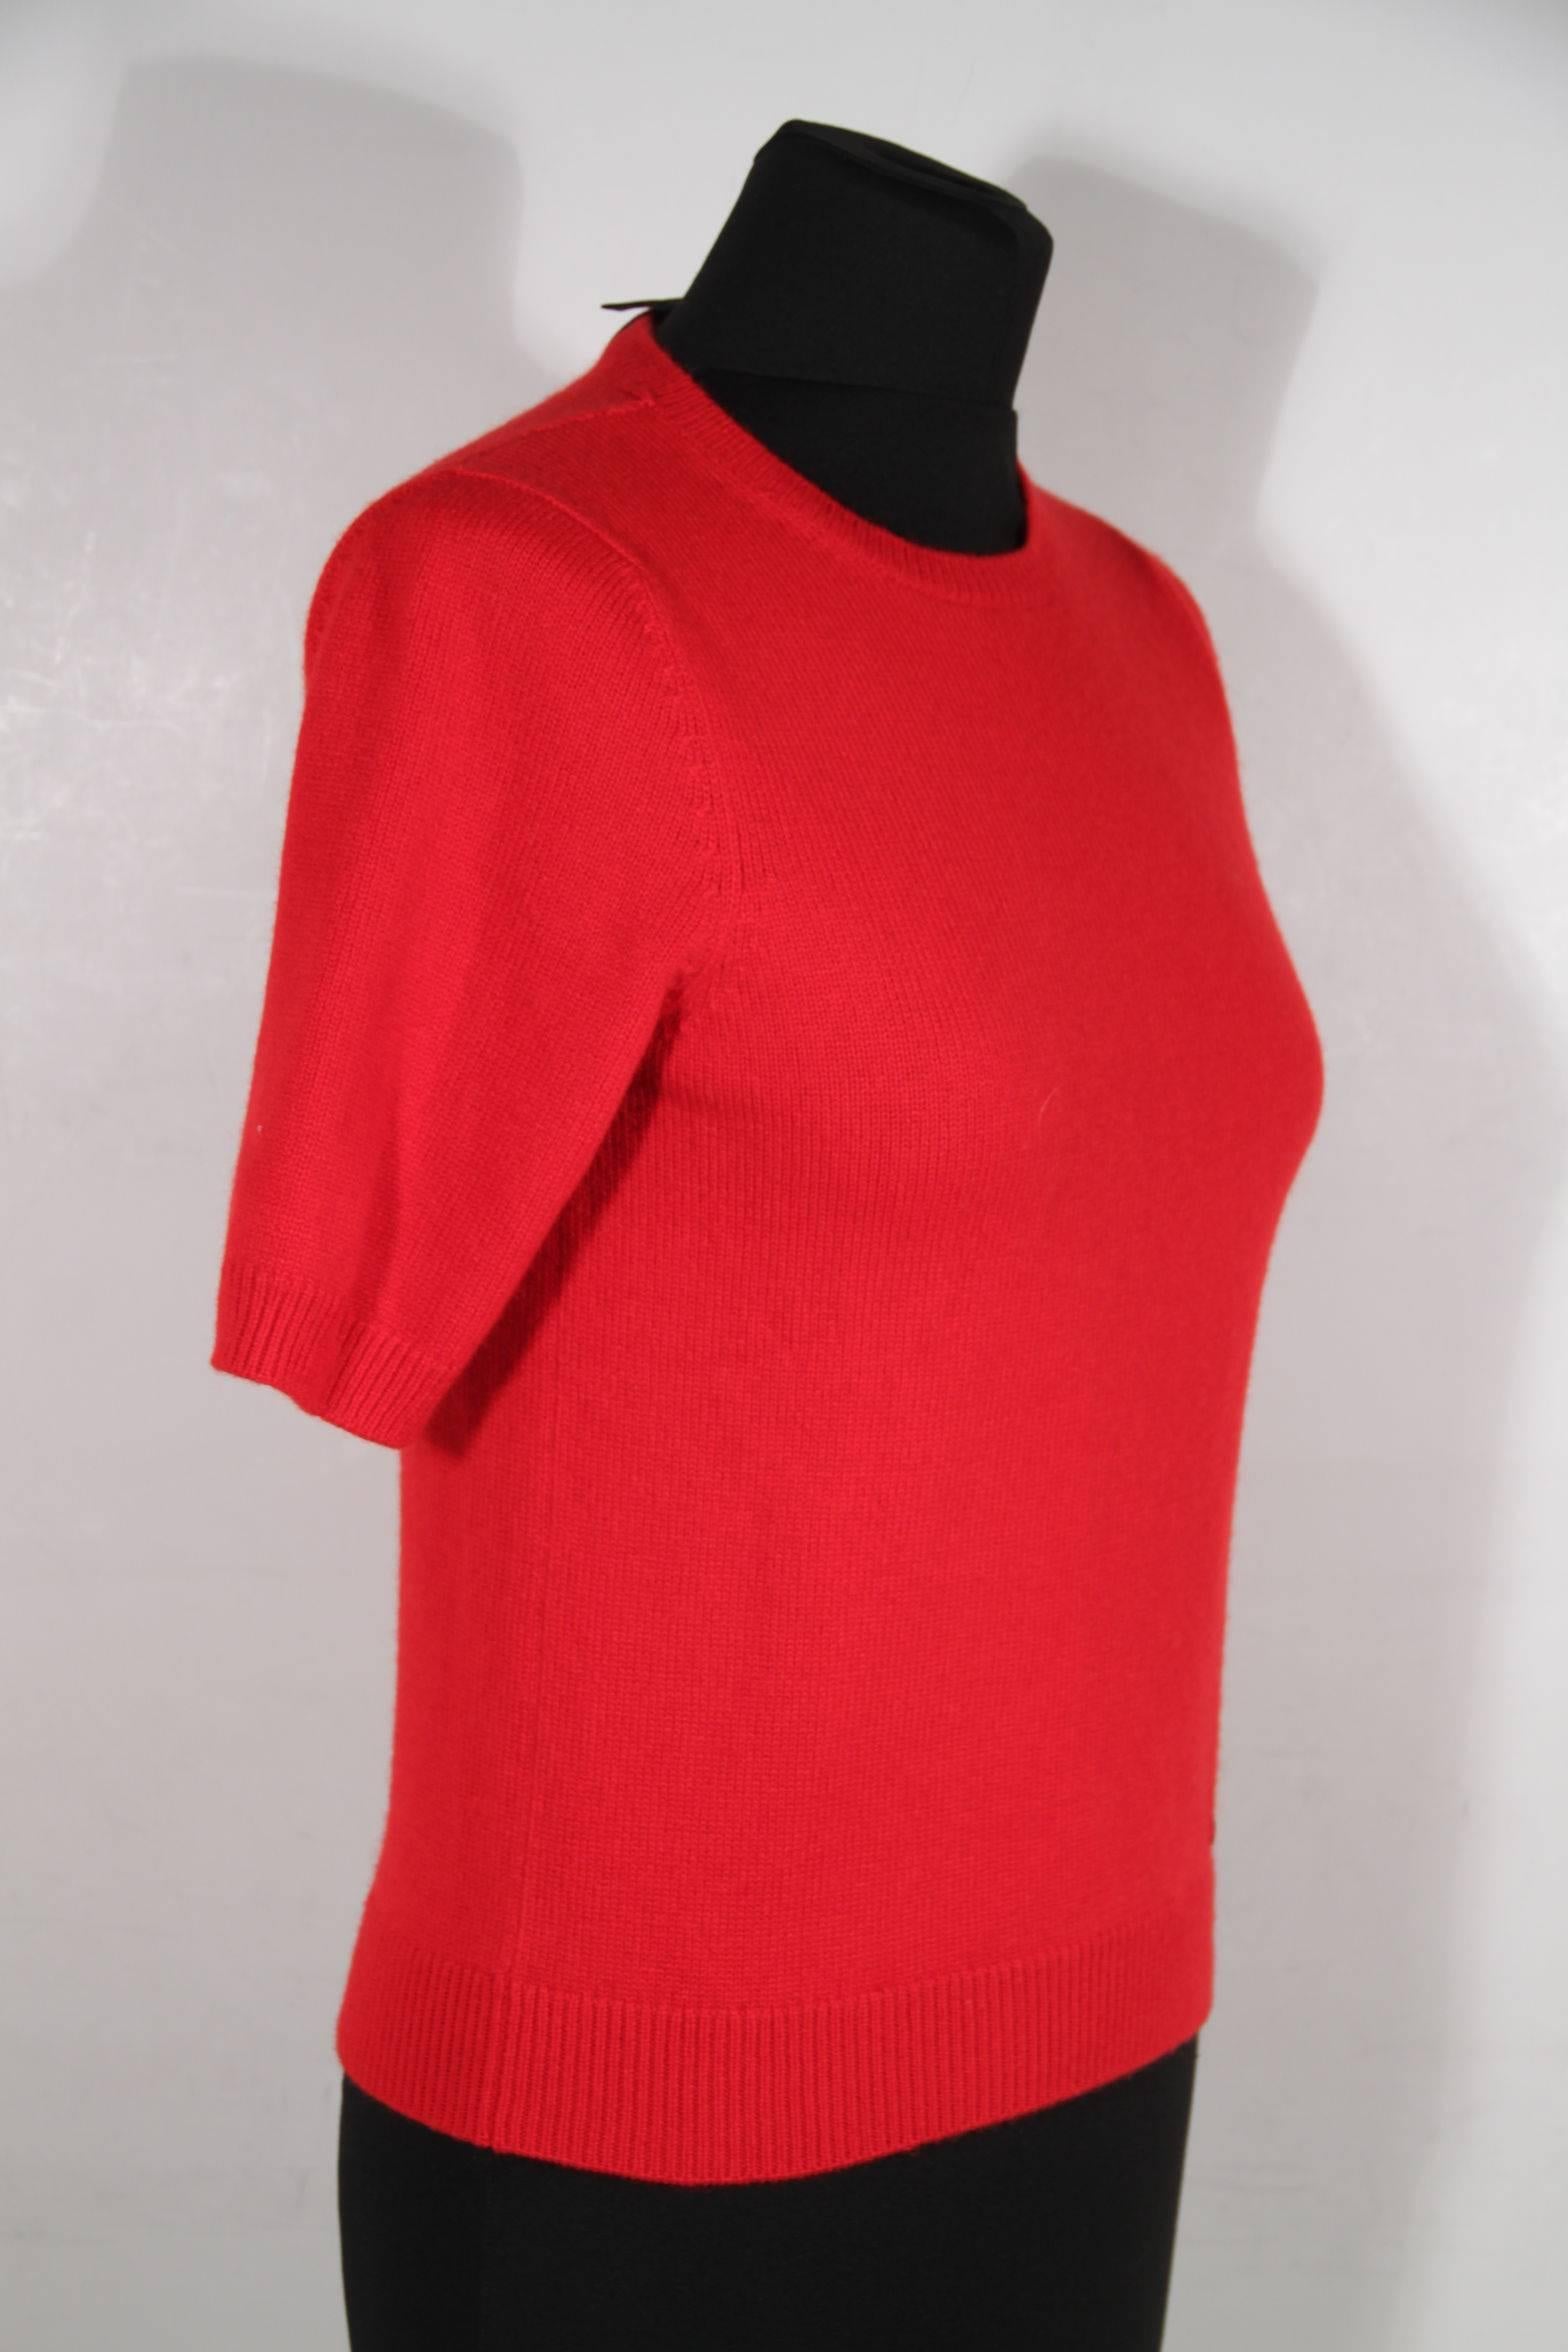 Logos & Tags: 'LOUIS VUITTON Paris' tag, size tag (XS), composition tag

Condition: B :GOOD CONDITION - Some light wear of use. 

Fabric / Material:100% cashmere

Color / Effect: Red

Size: XS (The size shown for this item is the size indicated